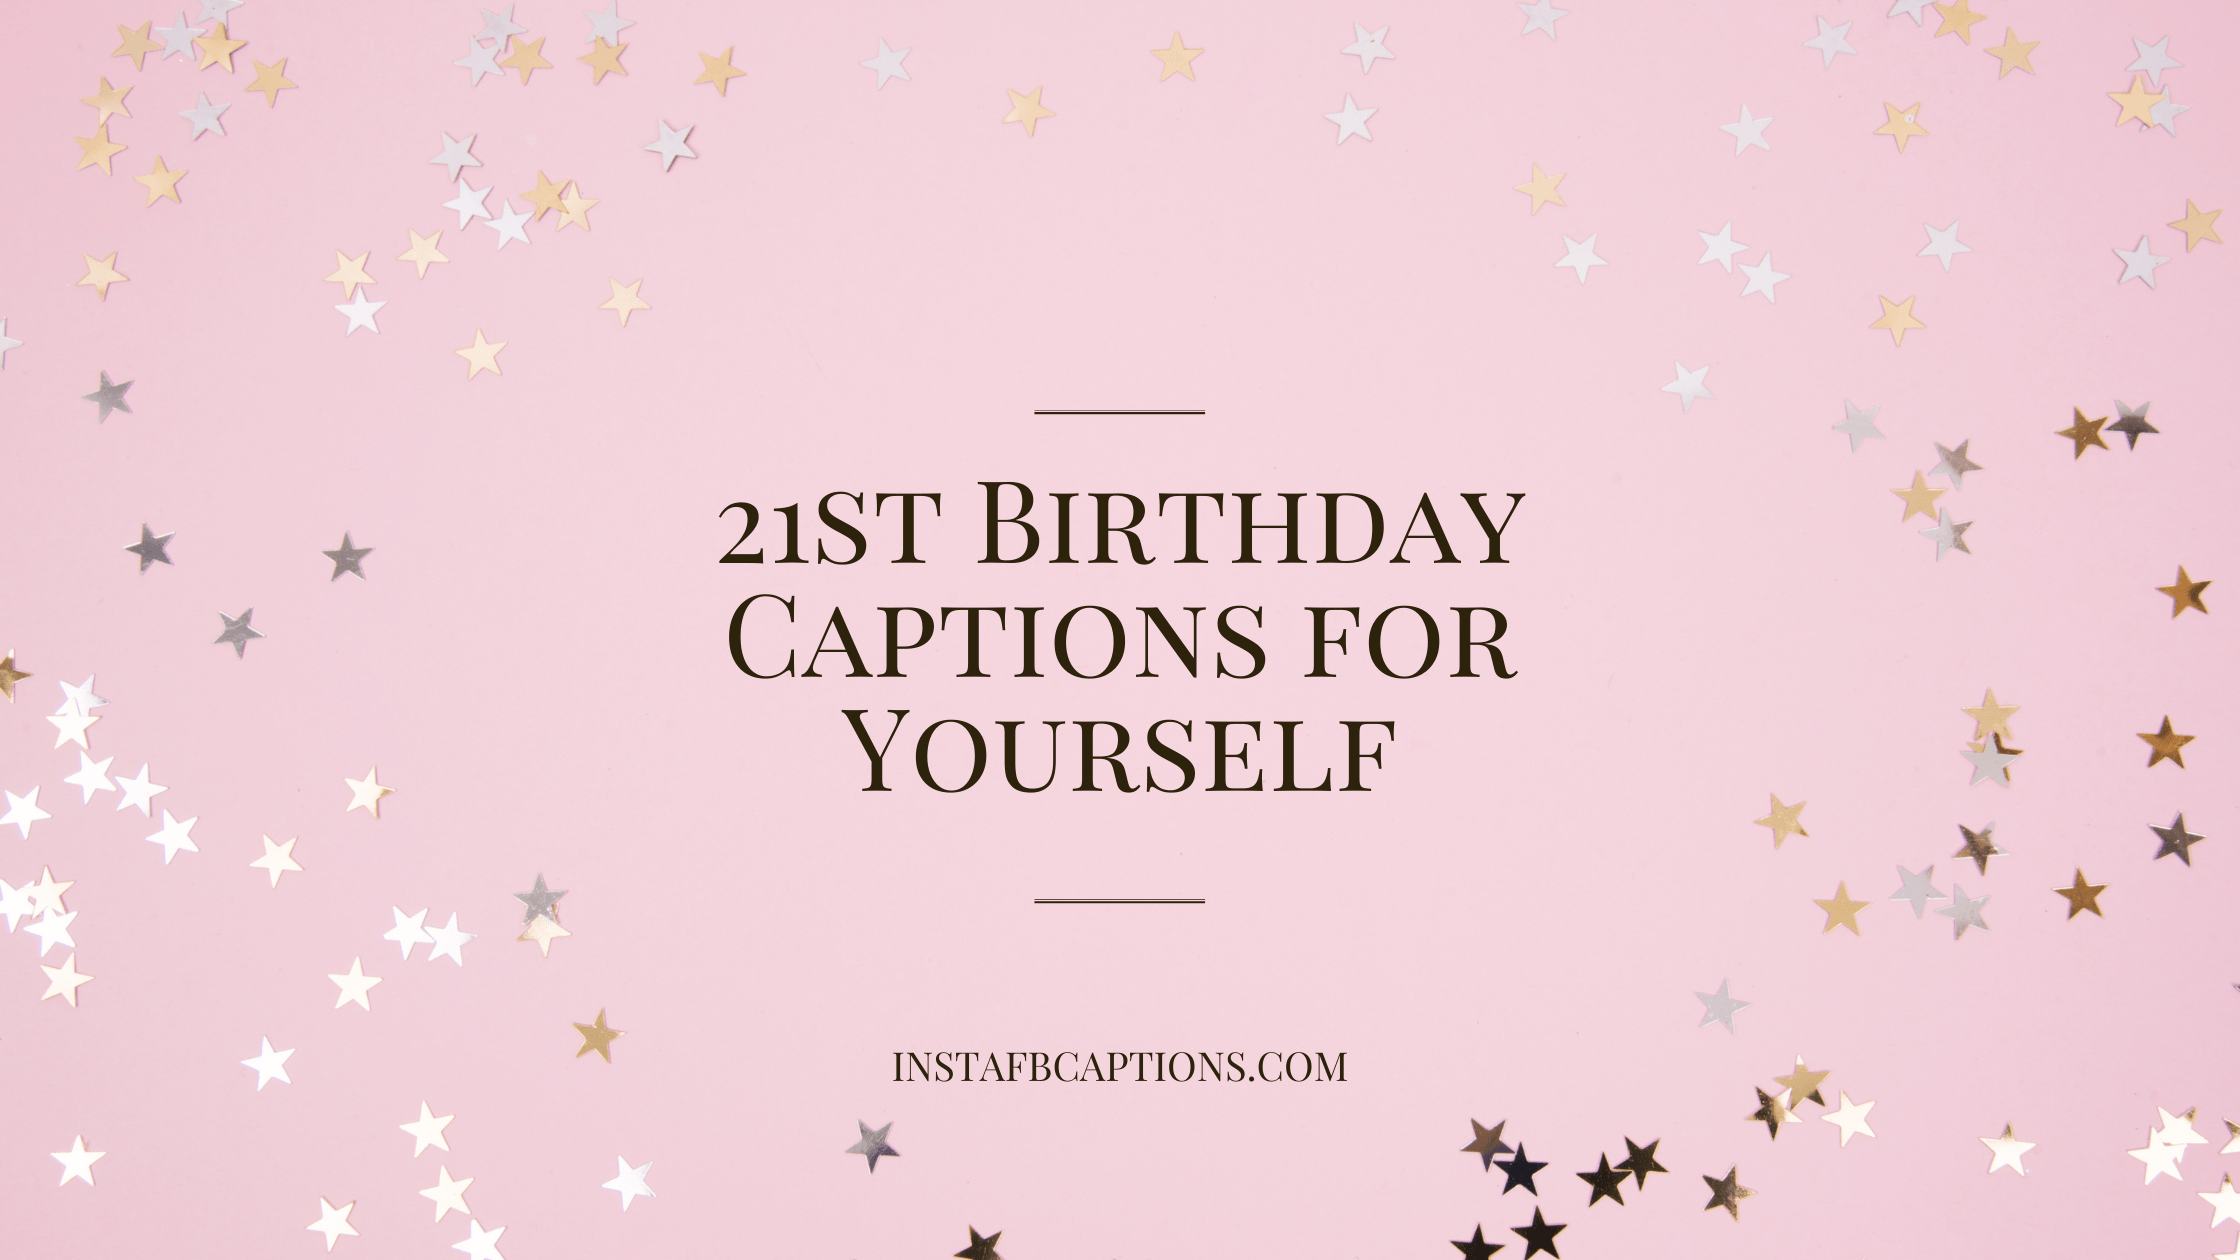 21st Birthday Captions For Yourself  - 21st Birthday Captions for Yourself - 21st Birthday Captions for Instagram in 2023